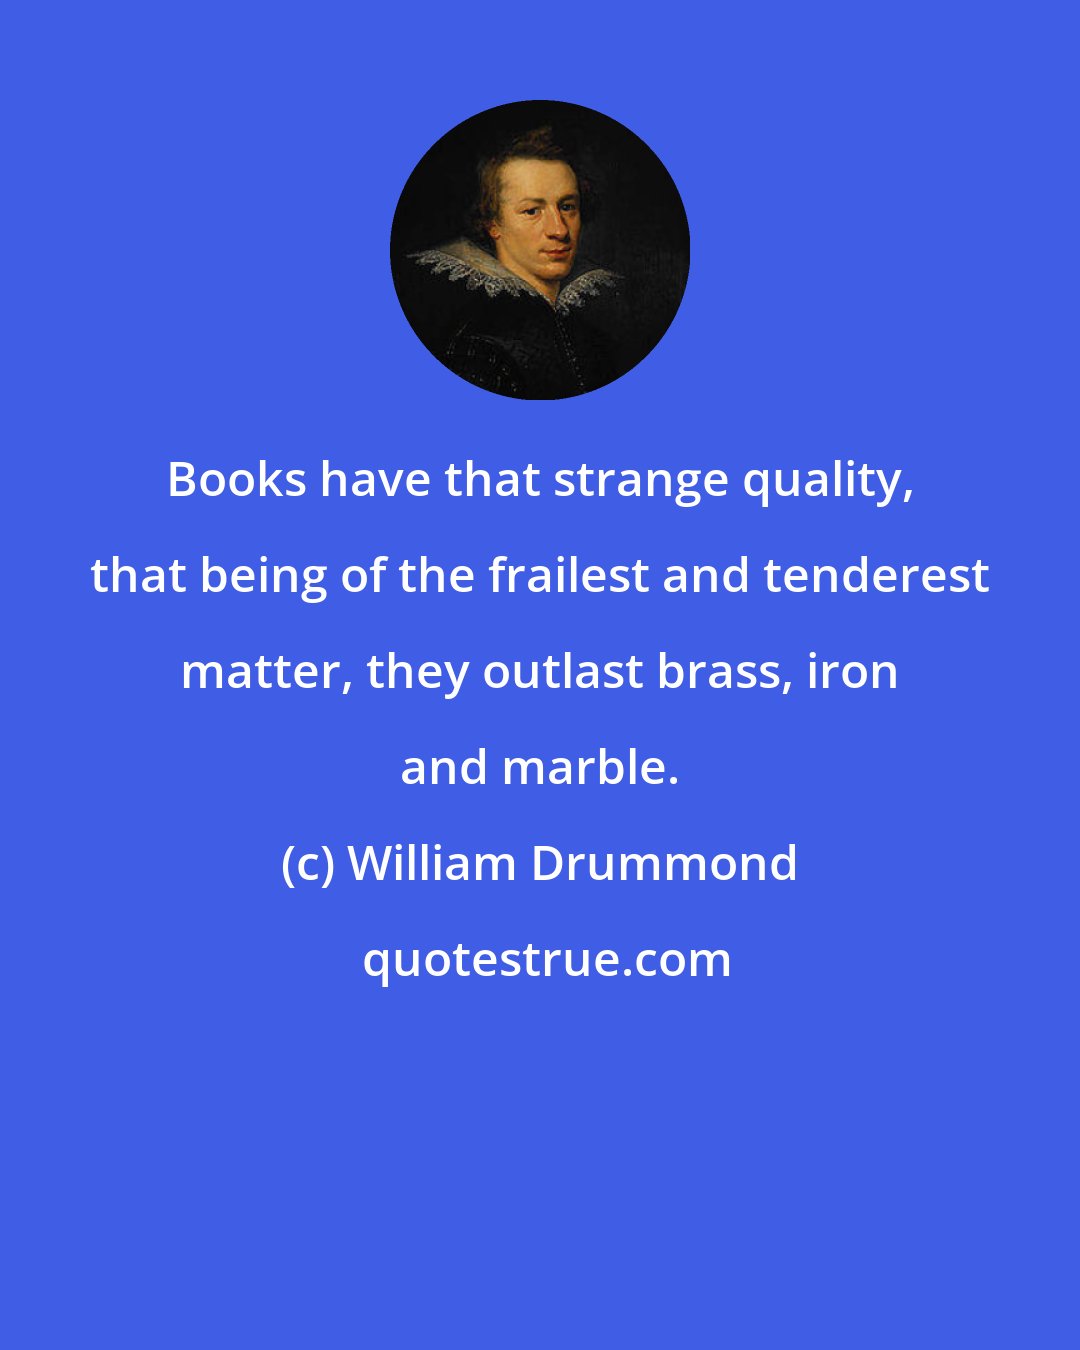 William Drummond: Books have that strange quality, that being of the frailest and tenderest matter, they outlast brass, iron and marble.